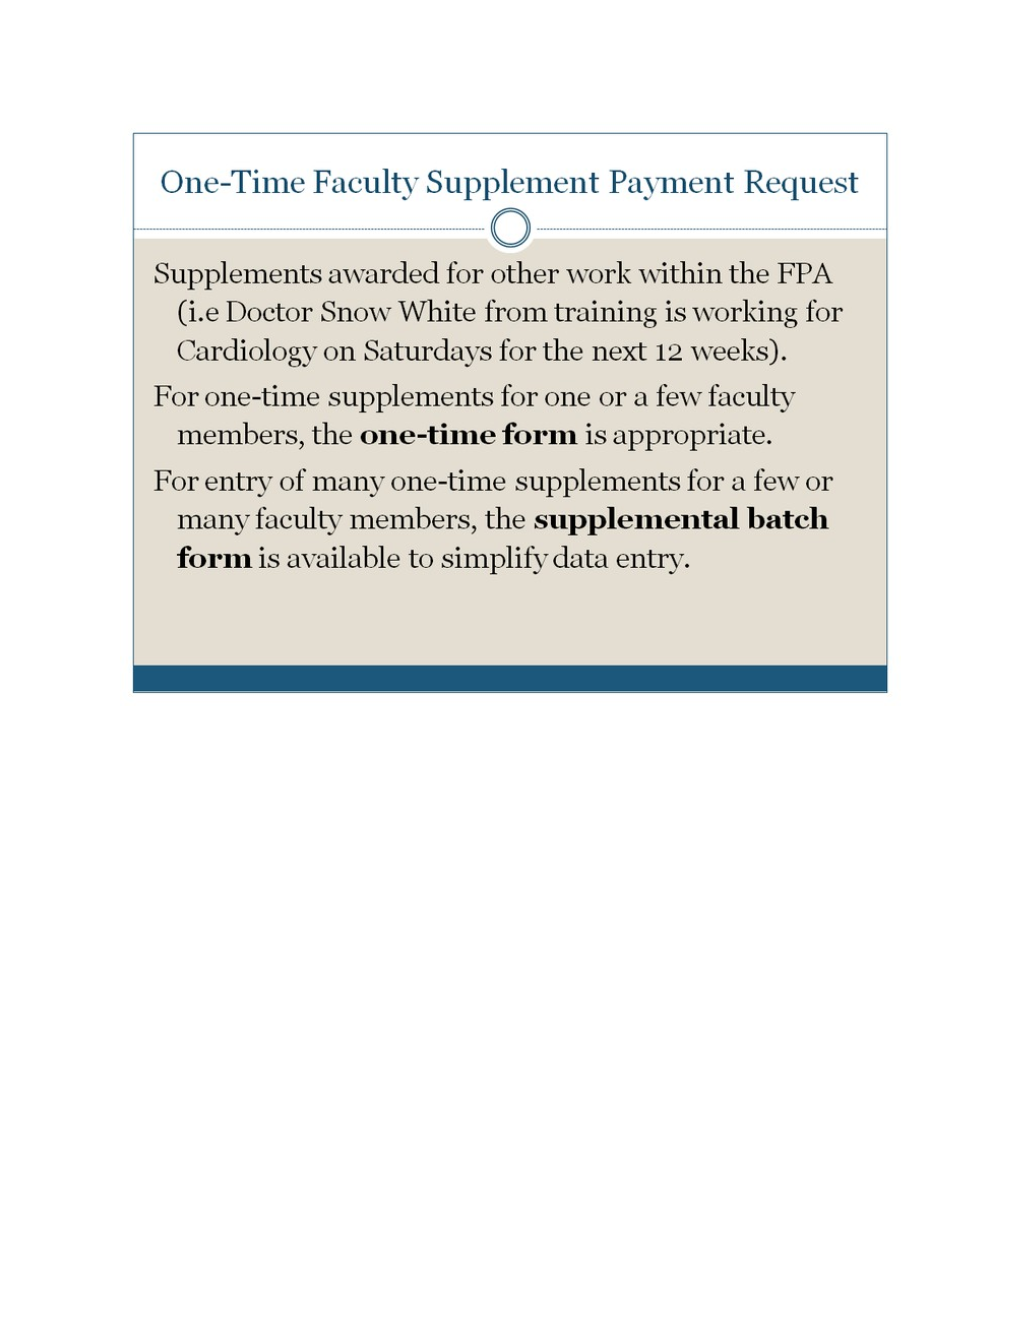 Faculty Supplemental Payment Requests